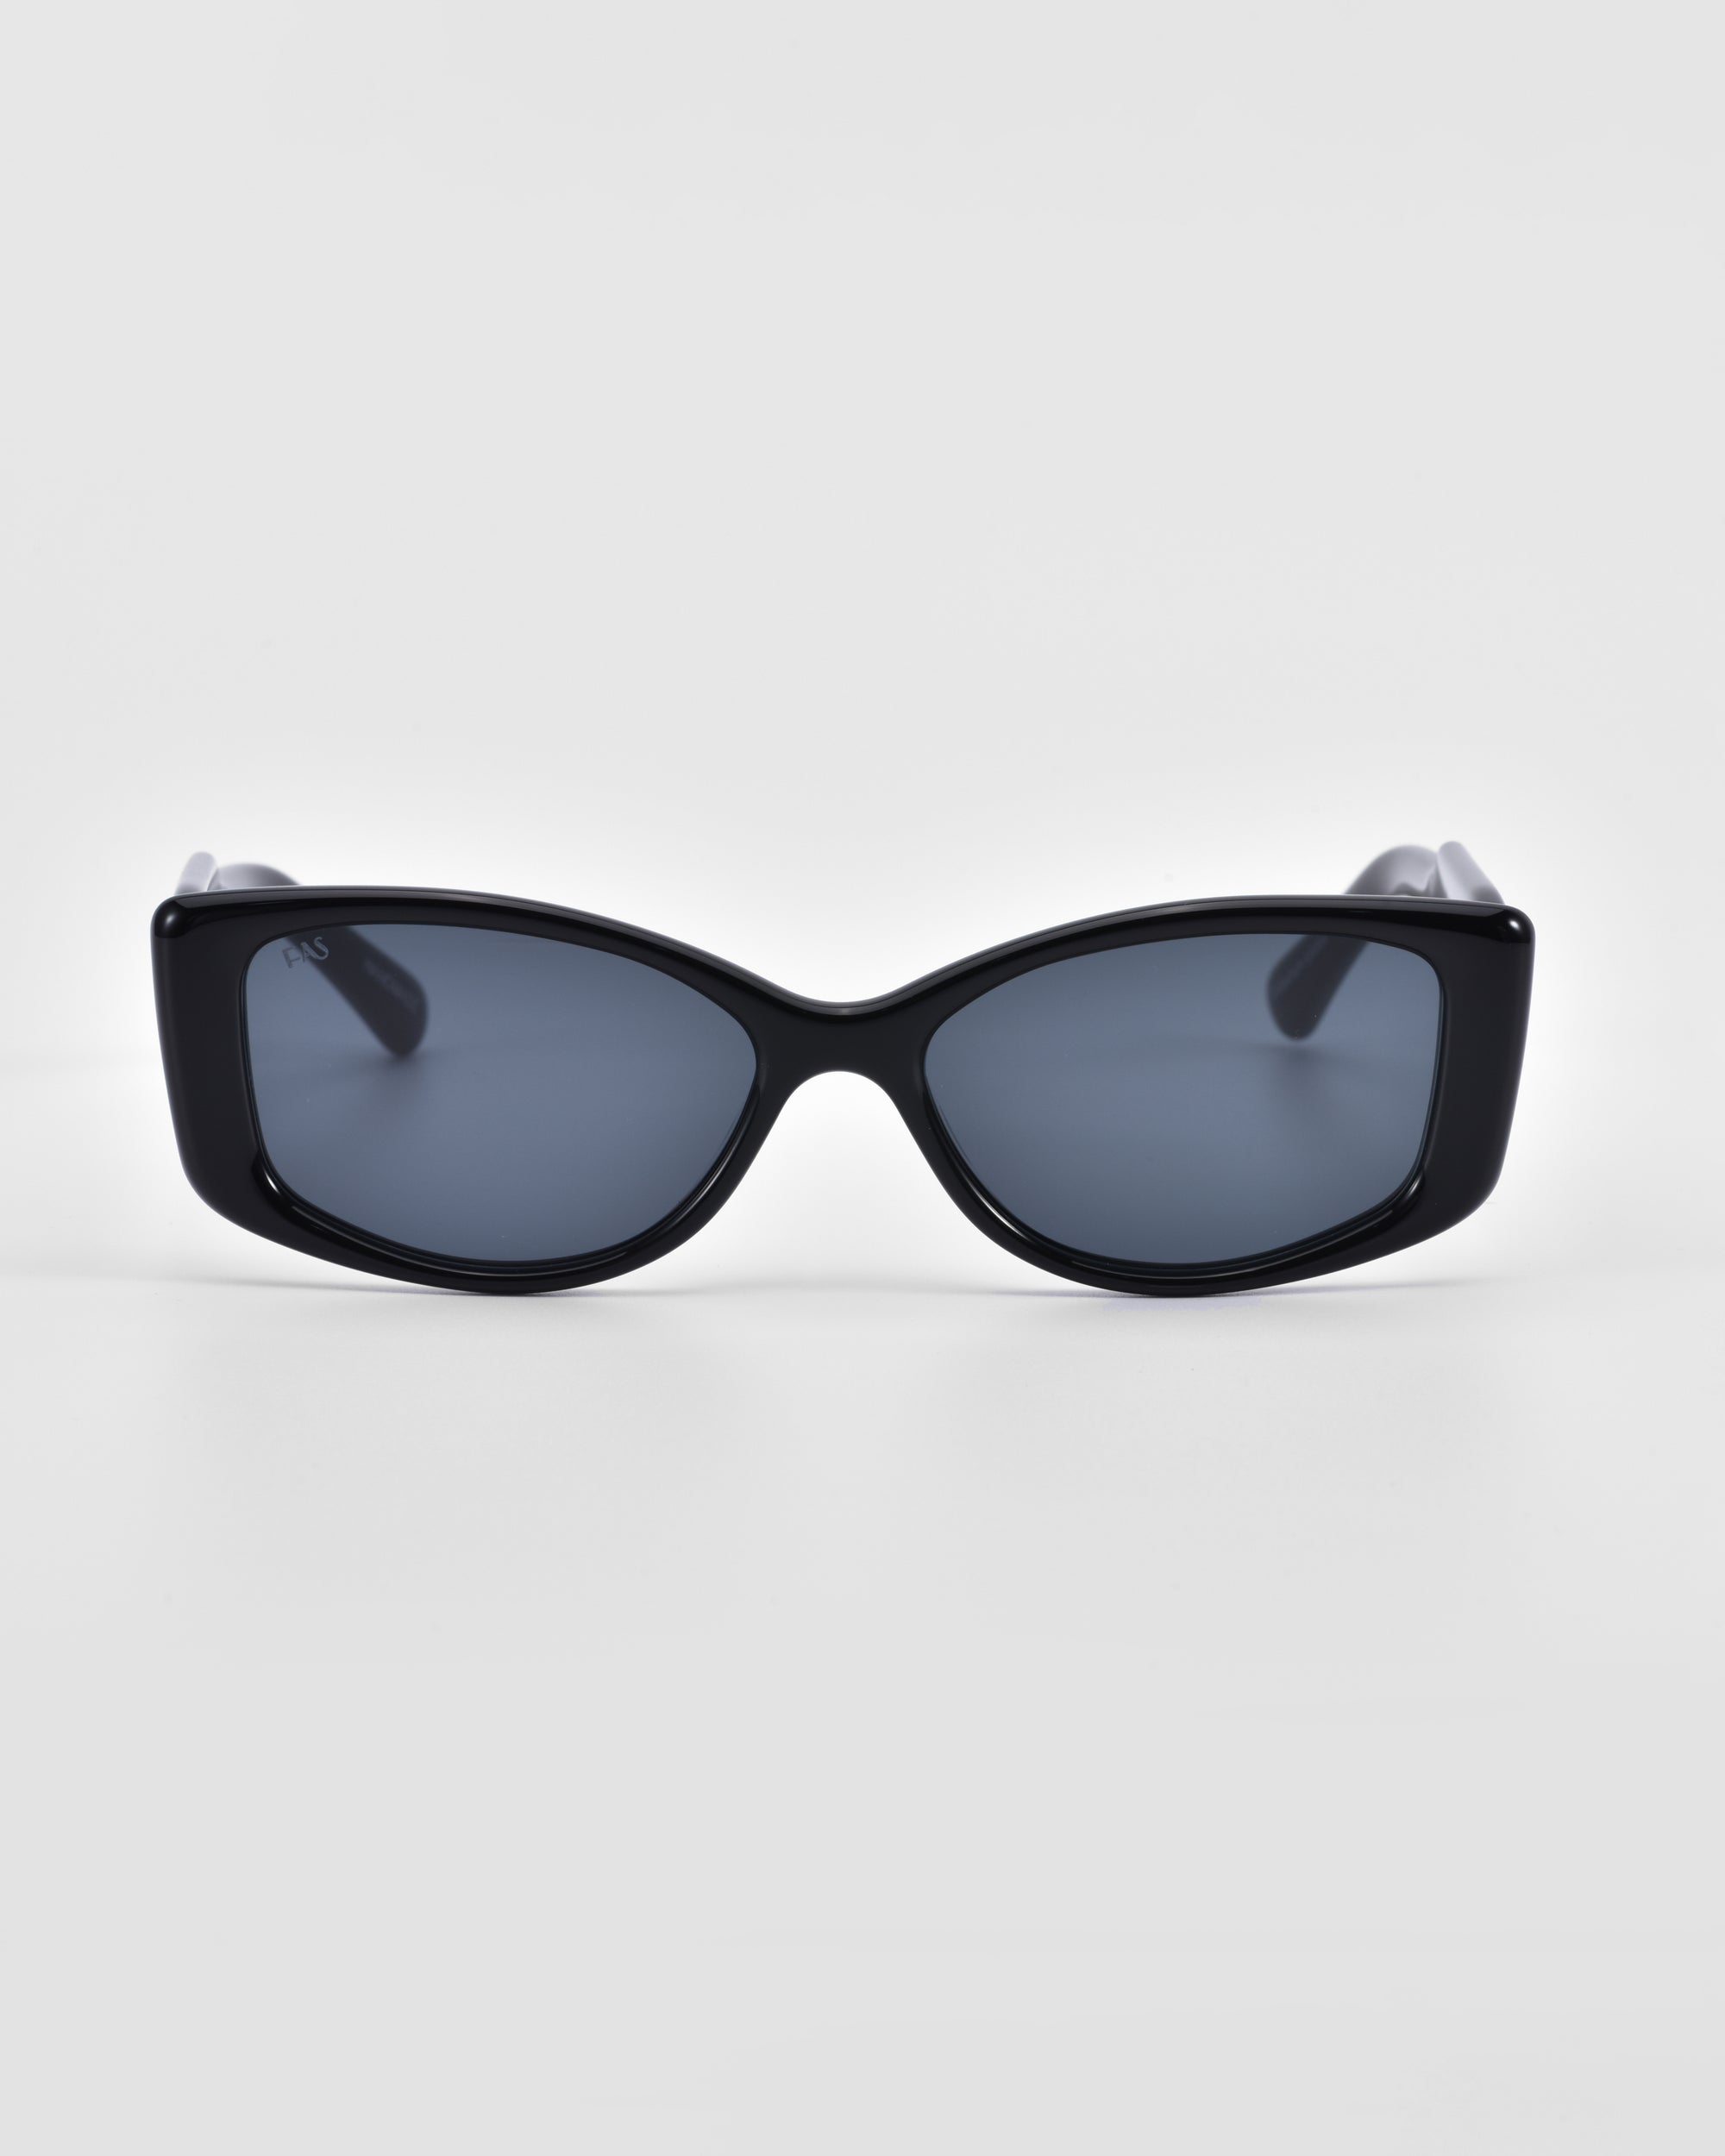 A pair of stylish black Mene sunglasses from For Art's Sake® with dark lenses is centered against a plain white background. The frame, featuring luxury frames with a sleek and slightly curved design, gives it a modern look. The sunglasses boast a simple yet fashionable style.